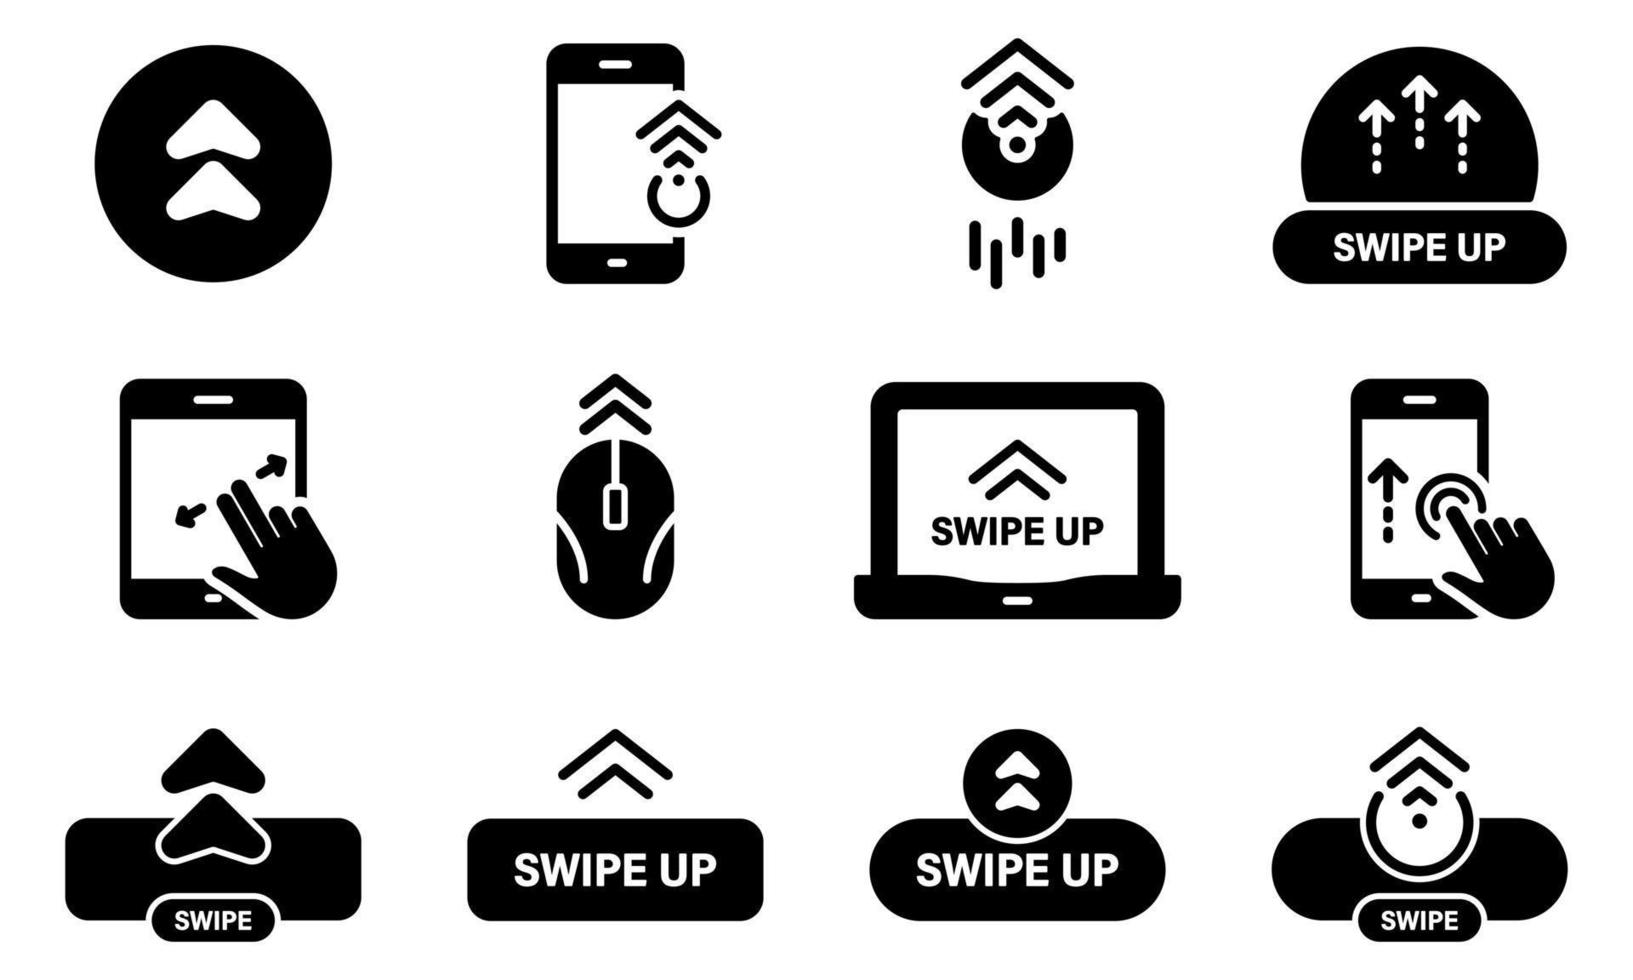 Slide Action Social Media App Silhouette Icon Set. Scroll Drag Move Click Touch Display Gesture Sign. Swipe Button on Smartphone Computer PC Laptop Glyph Pictogram. Isolated Vector Illustration.